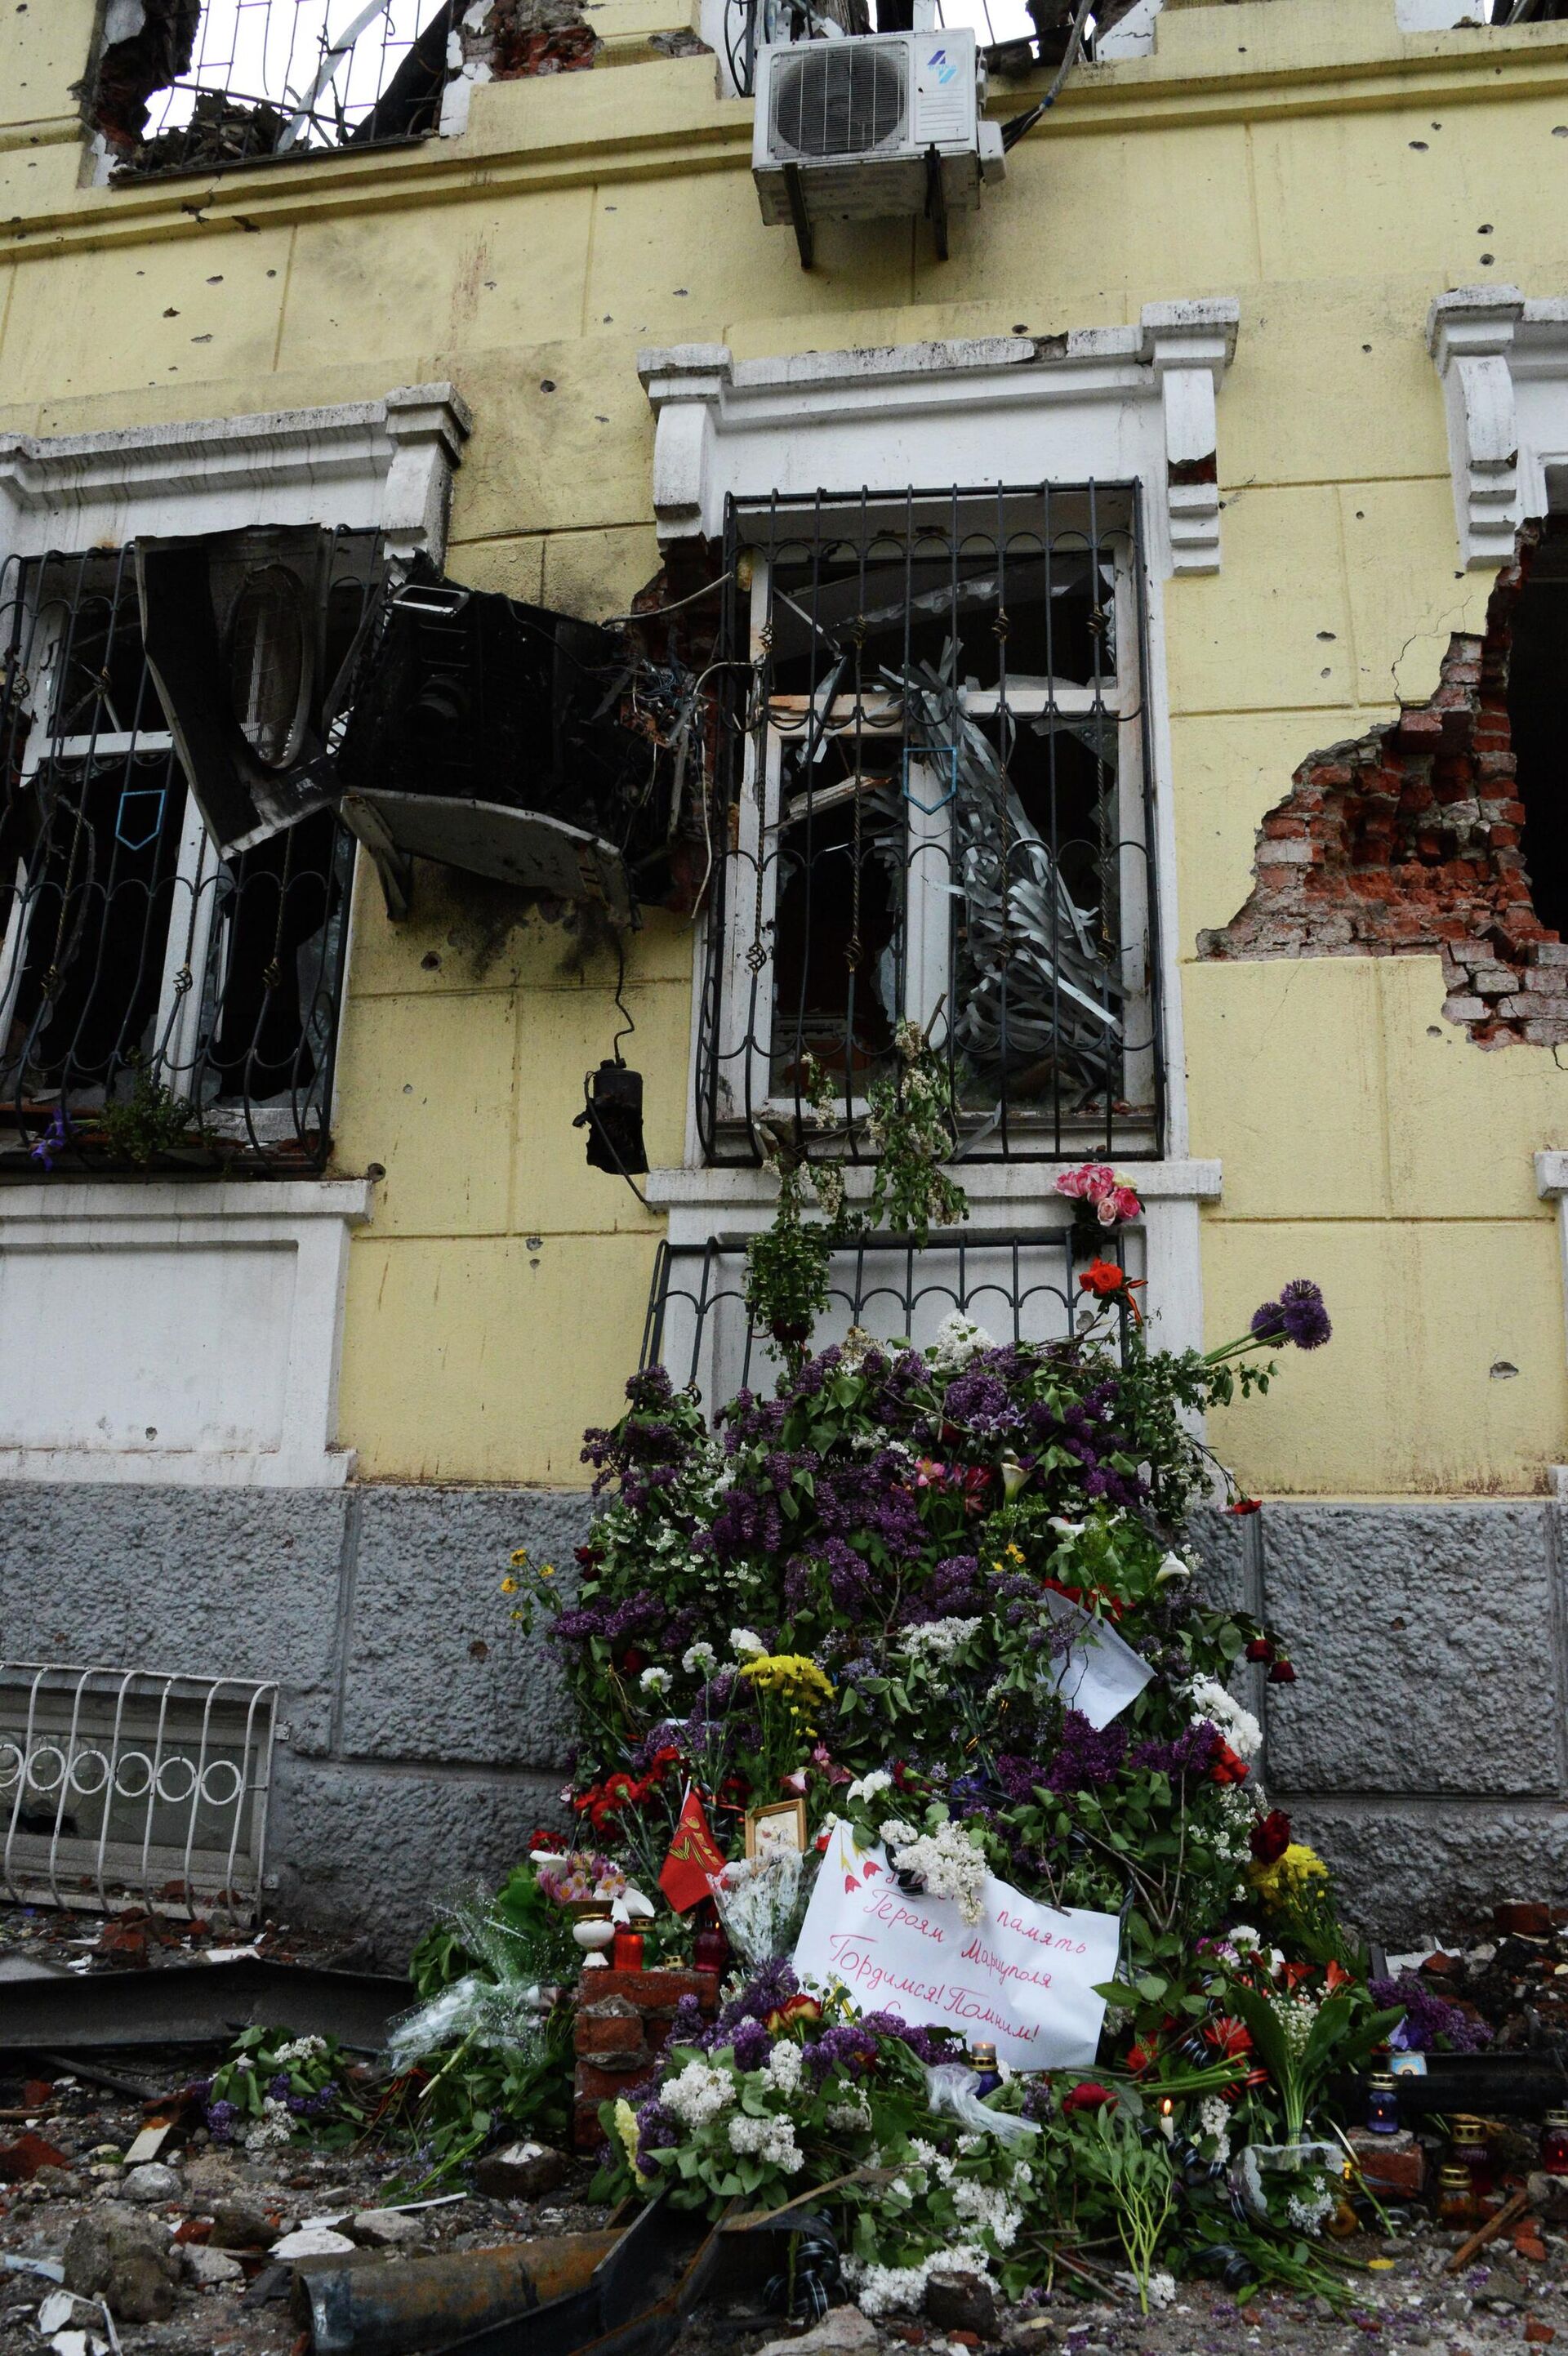 Flowers and candles in memory of those killed at Mariupol police headquarters in May 2015. - Sputnik International, 1920, 22.05.2022